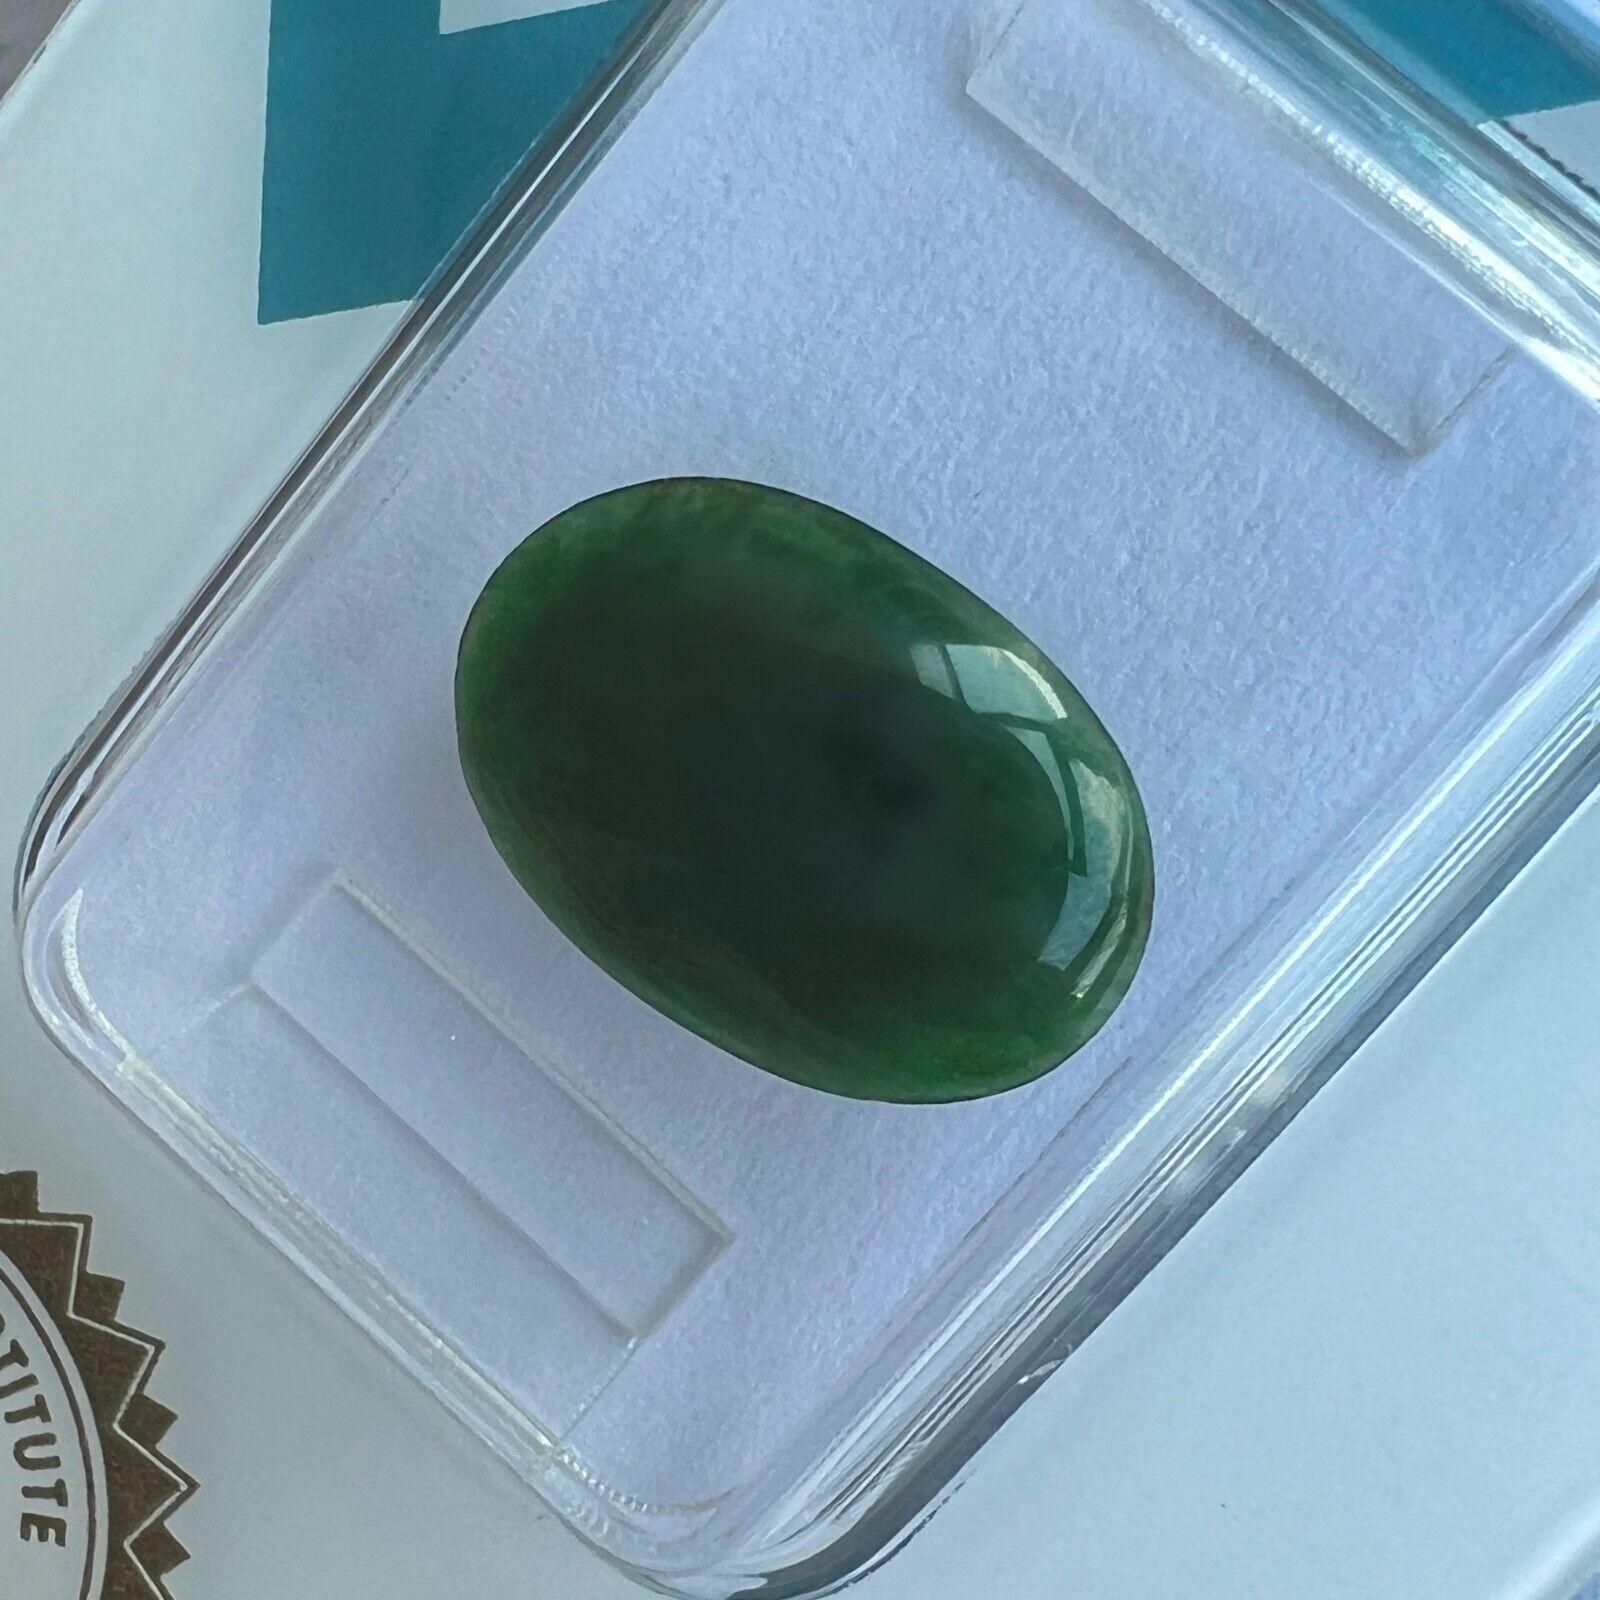 Rare 2.30Ct IGI Certified Jadeite Jade ‘A’ Grade Deep Green Oval Cabochon Gem

Natural IGI Blister Sealed Untreated A Grade Jadeite Gemstone.
2.30 Carat with an excellent oval cabochon cut and bright green colour. Fully certified by IGI in Antwerp,